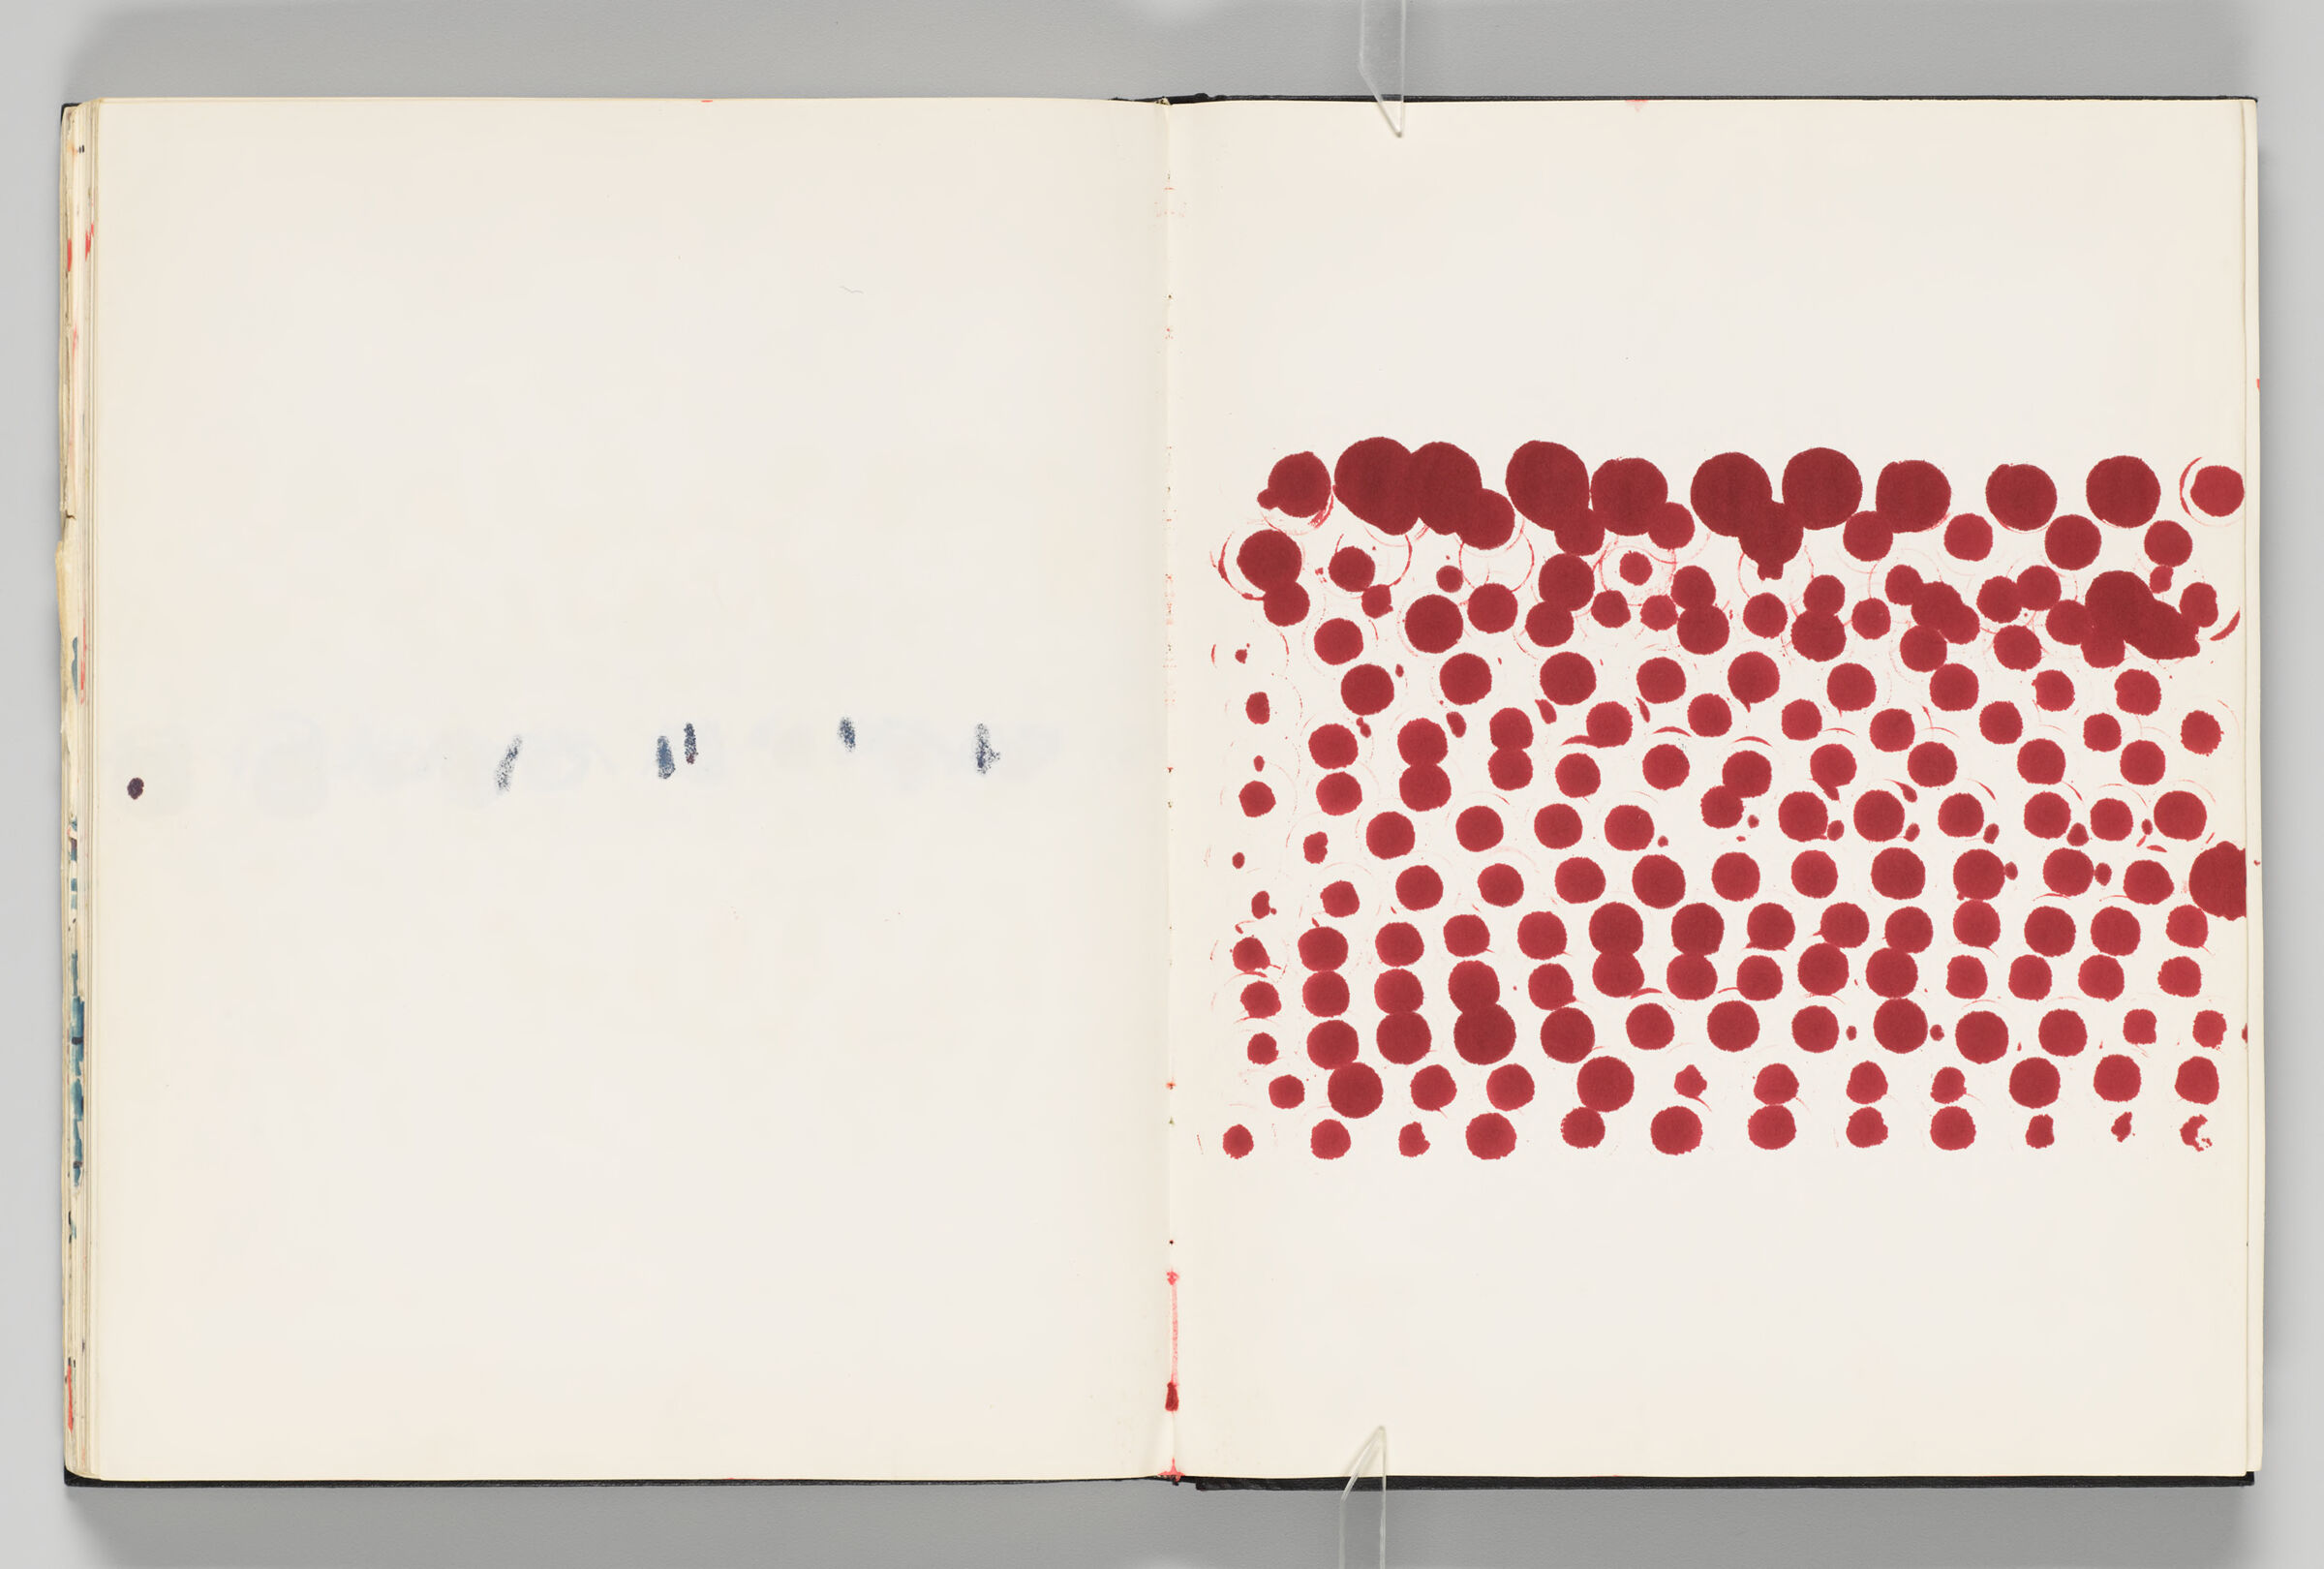 Untitled (Color Transfer, Left Page); Untitled (Red Marker Raster, Right Page)